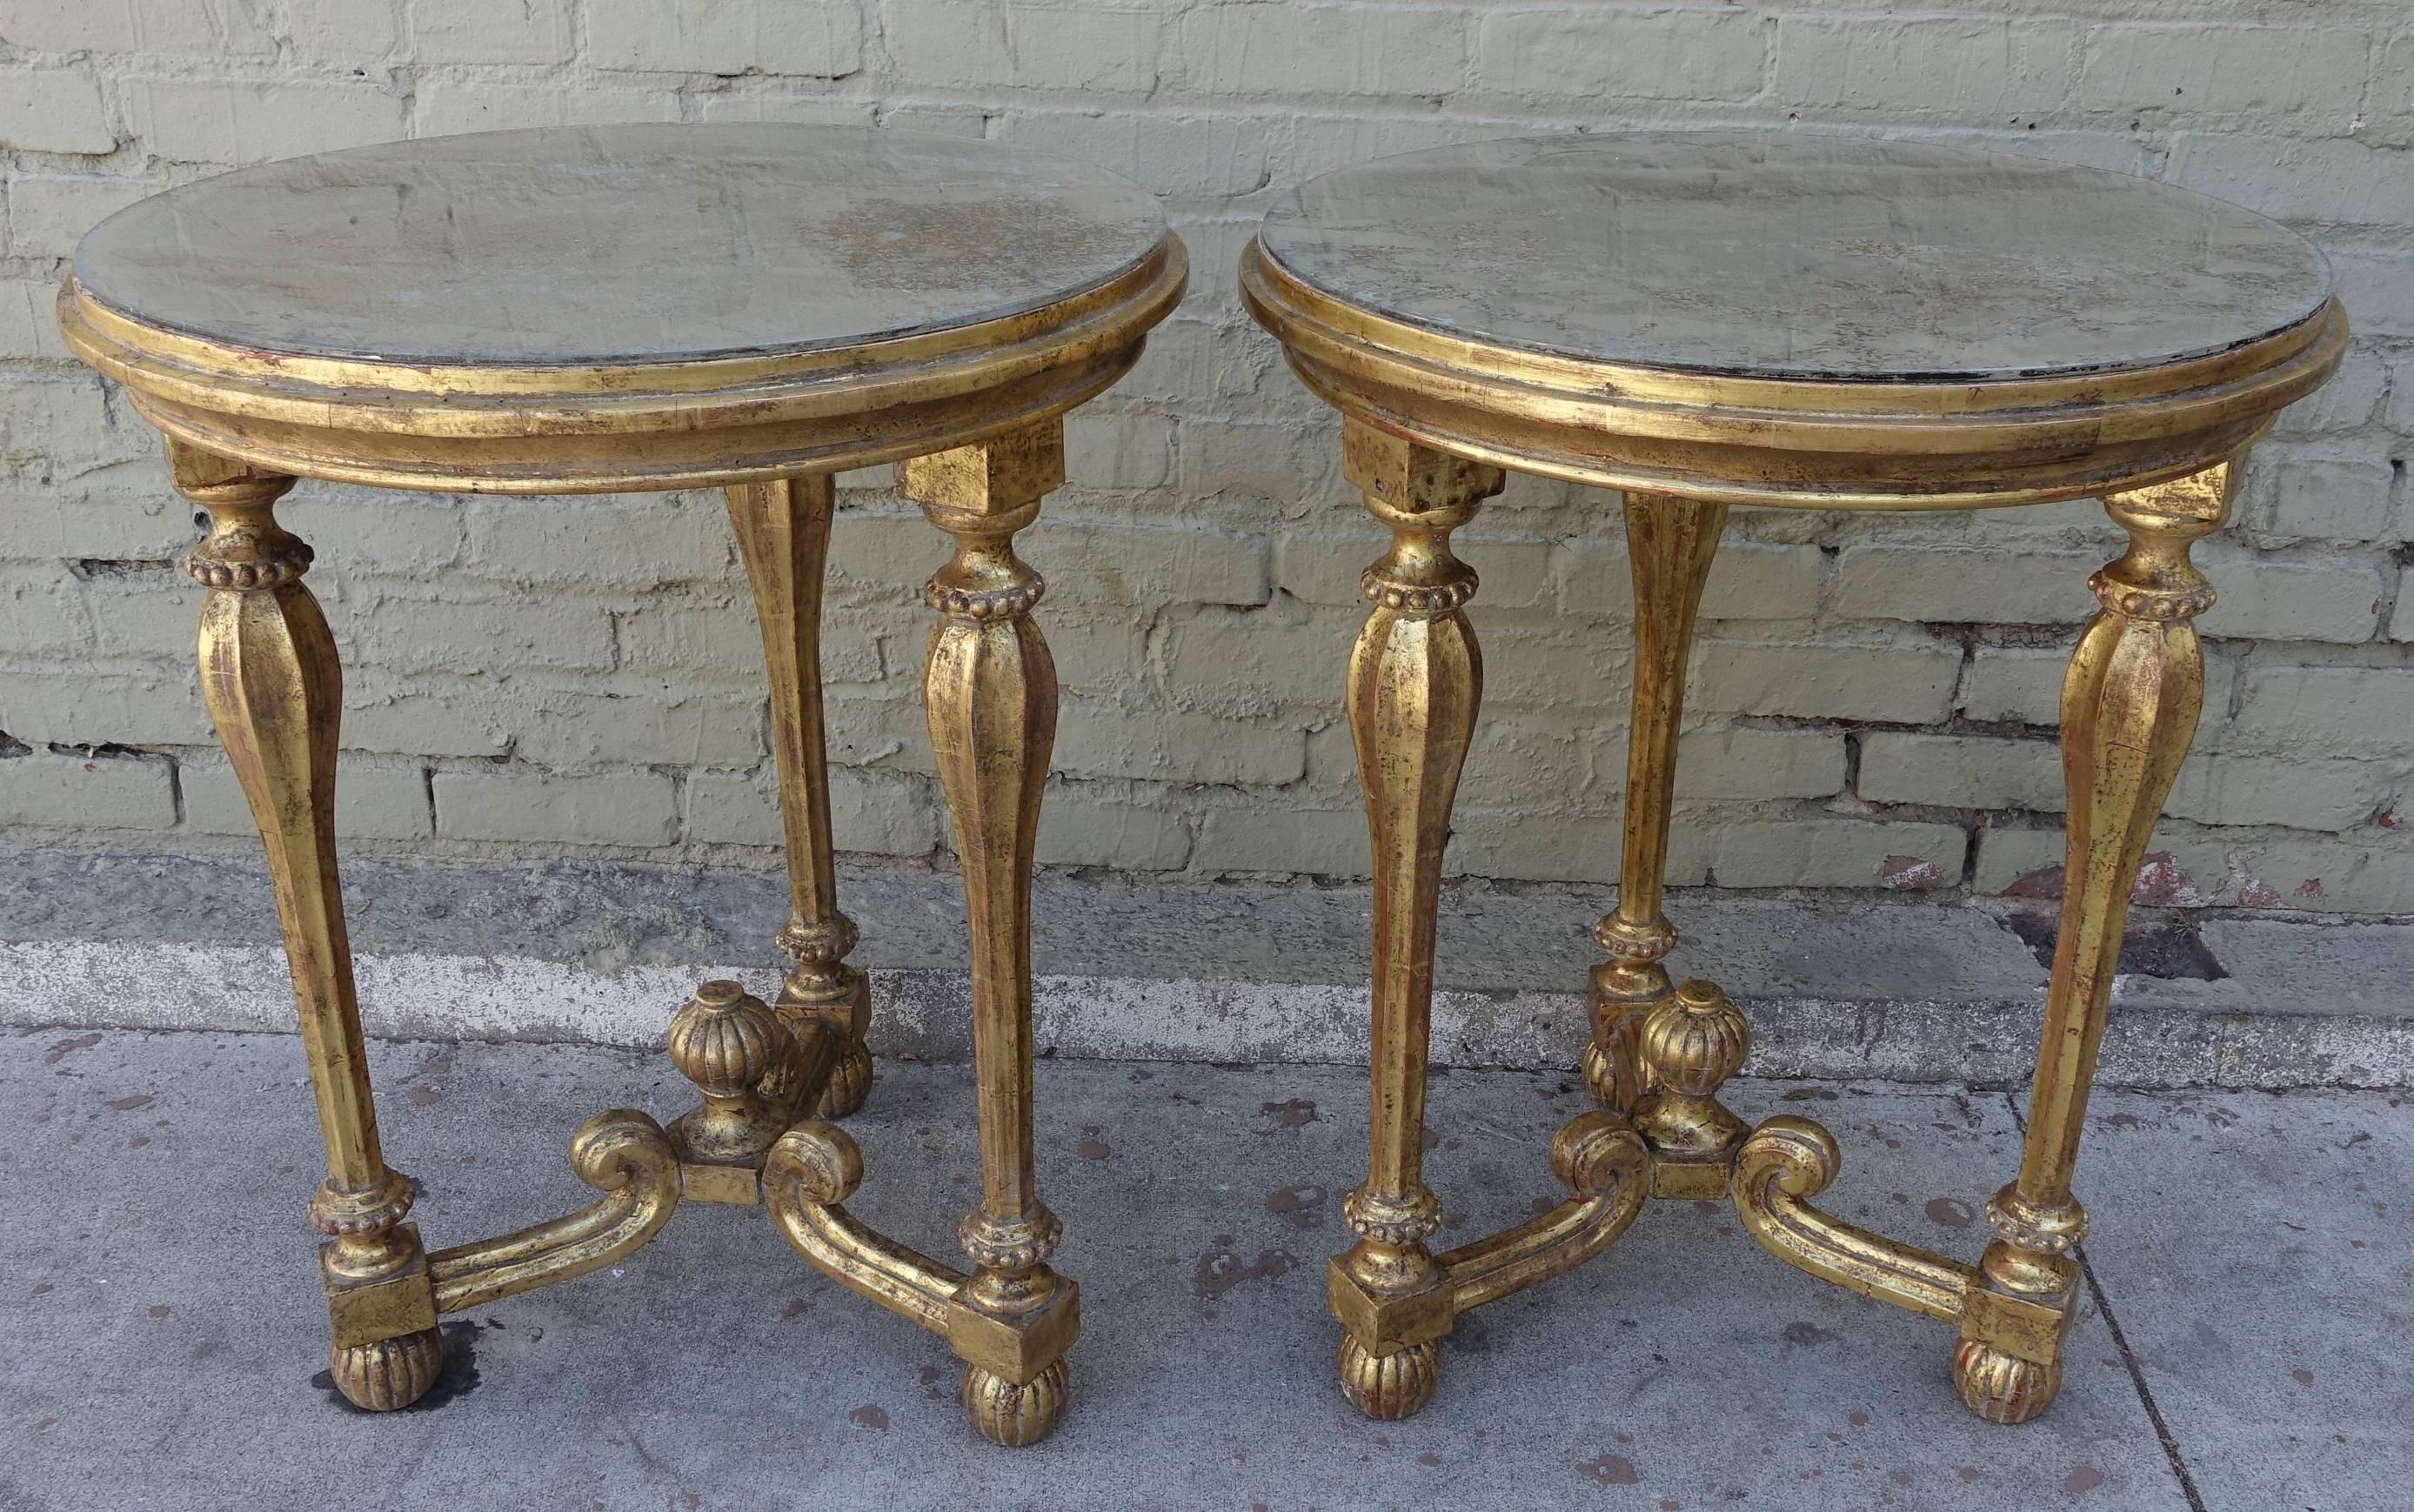 Pair of giltwood Italian tables standing on tripod bases and finished with antiqued mirrored tops. Bottom stretcher meets at center finial and the legs end in fluted bun feet.